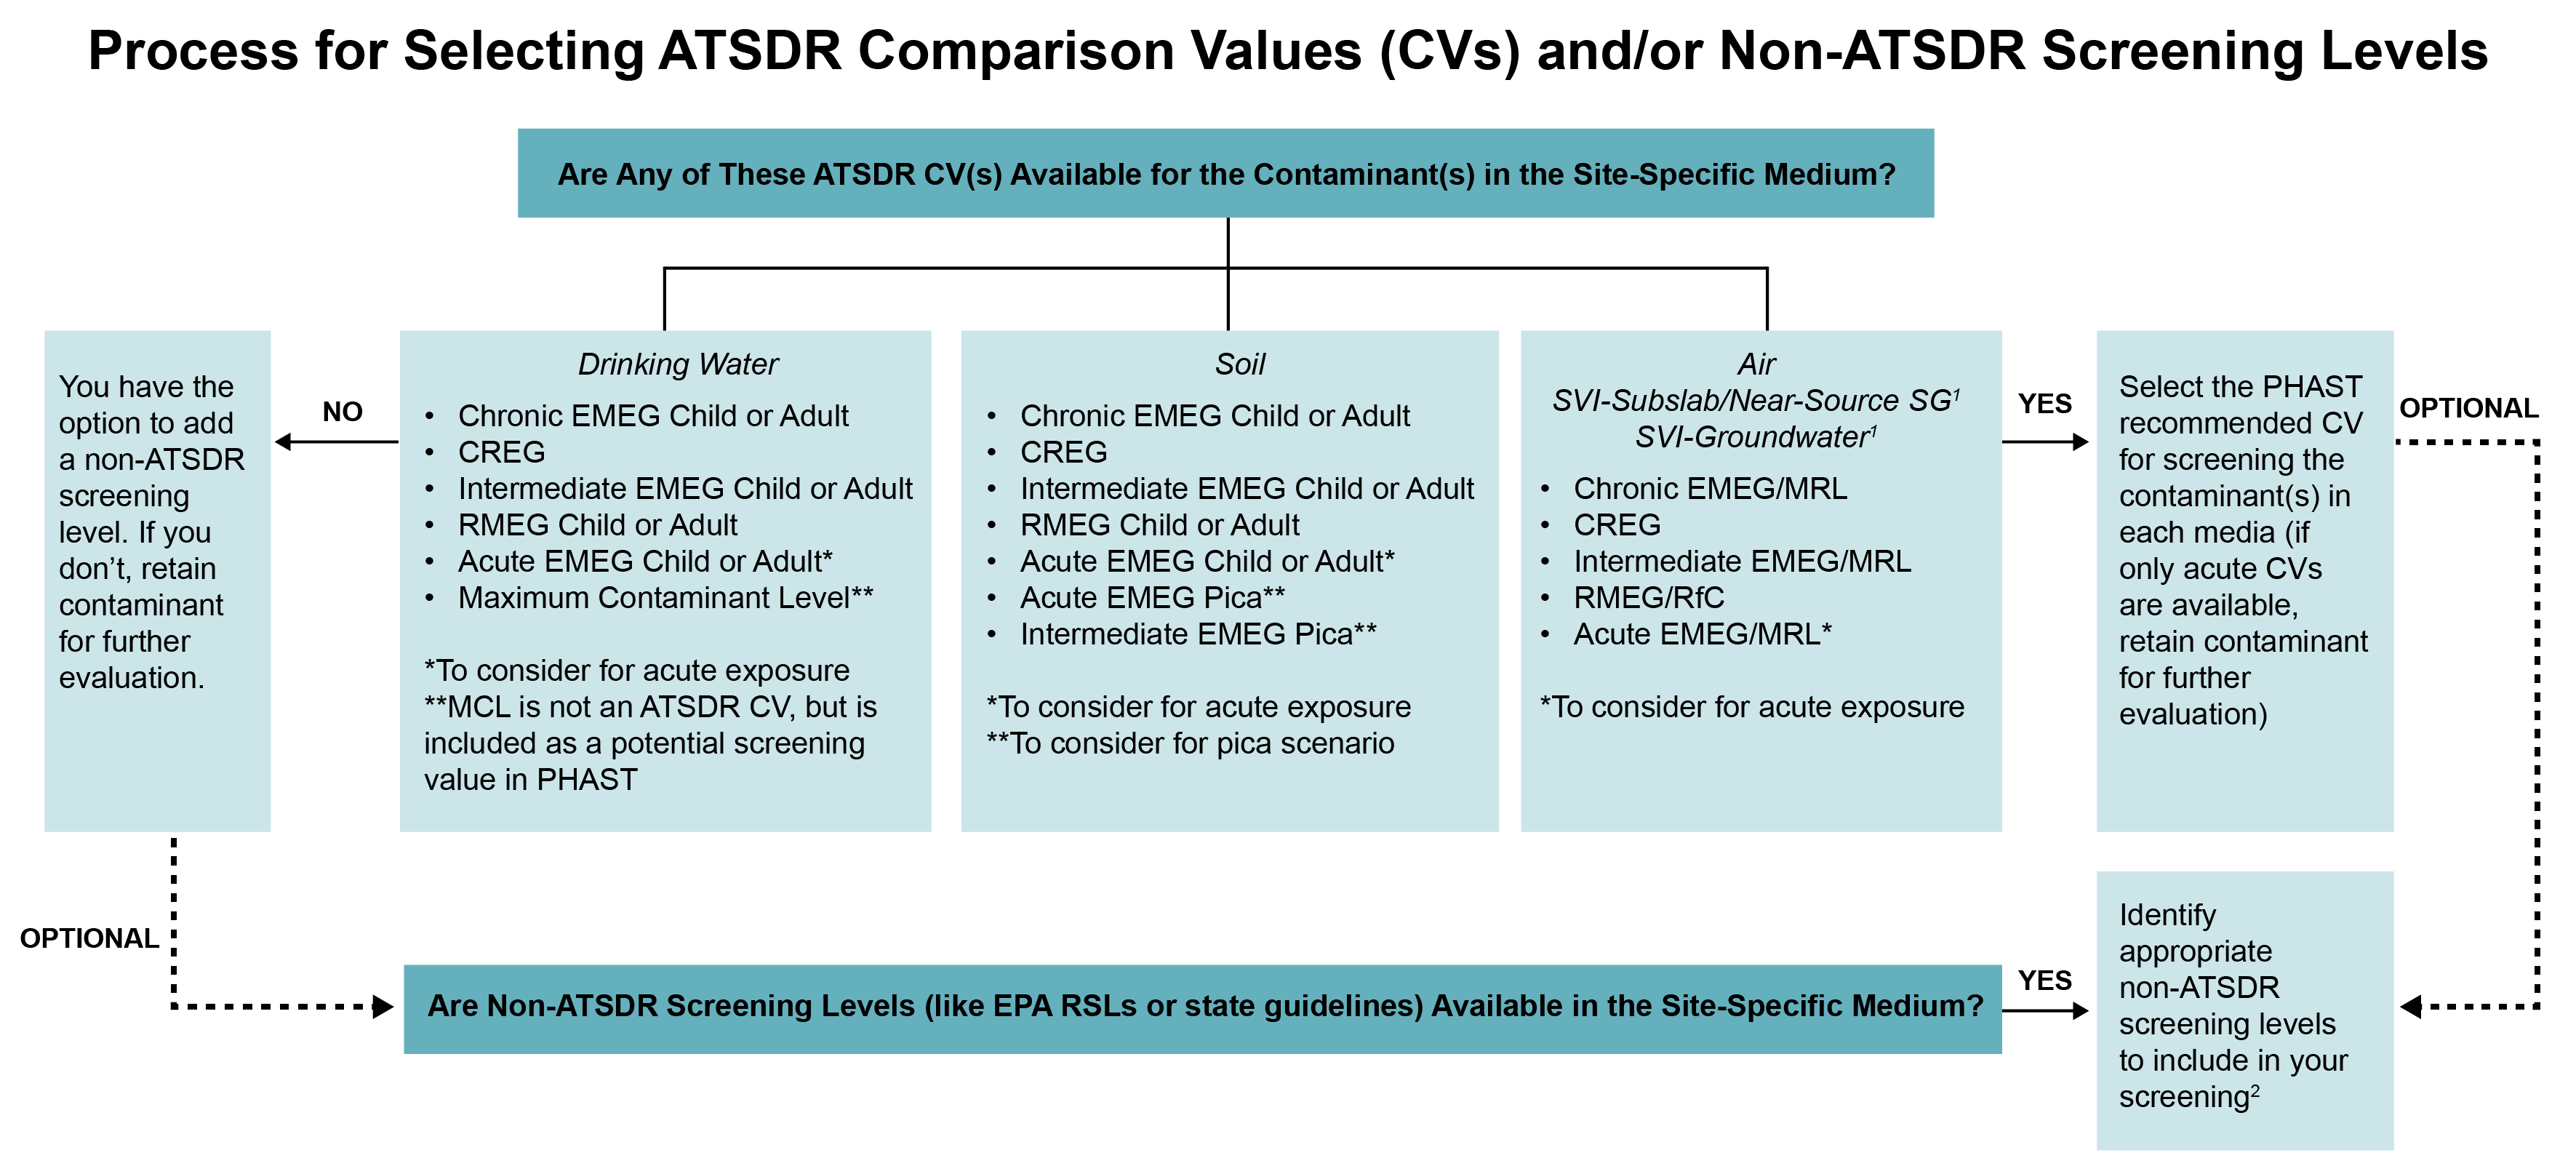 Diagram showing the process for selecting ATSDR comparison values (CVs) and/or Non-ATSDR Screening Levels